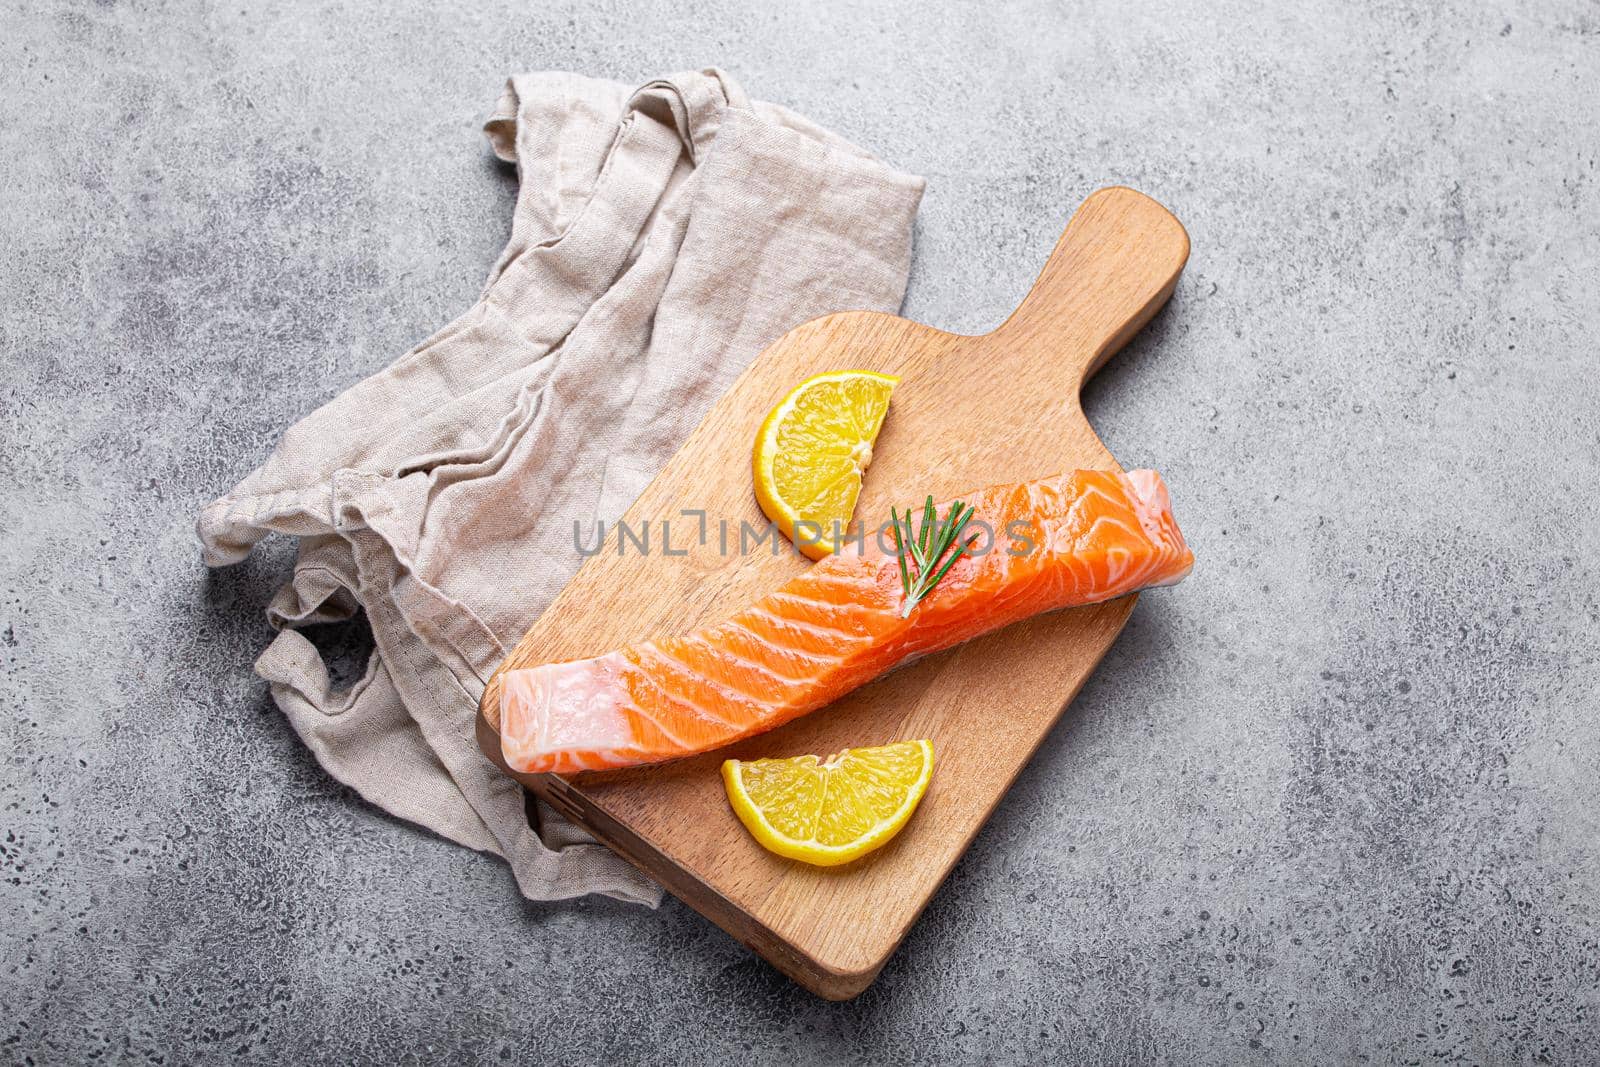 Raw salmon fish fillet with lemon wedges and rosemary on wooden cutting board on gray stone concrete rustic background kitchen table from above, healthy eating and diet